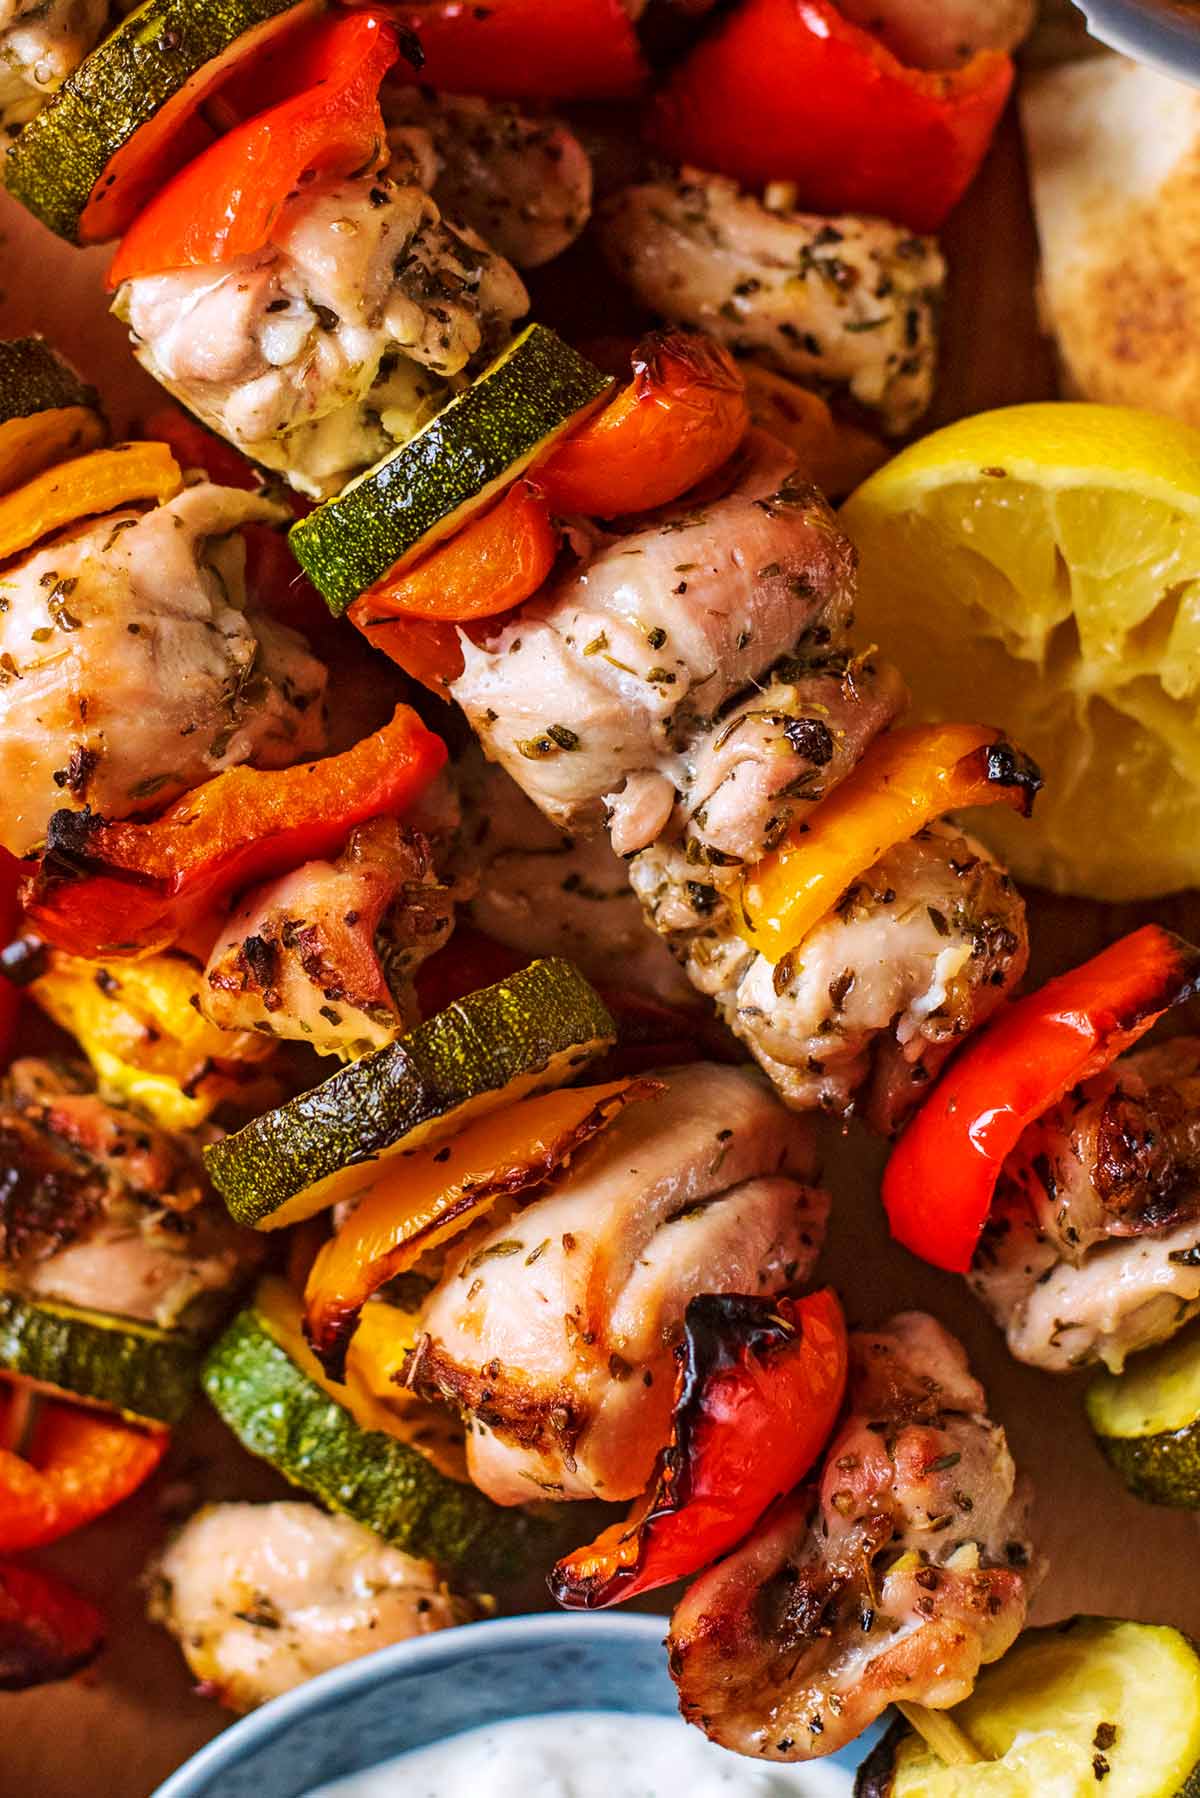 Chunks of cooked chicken and sliced vegetables together on skewers.